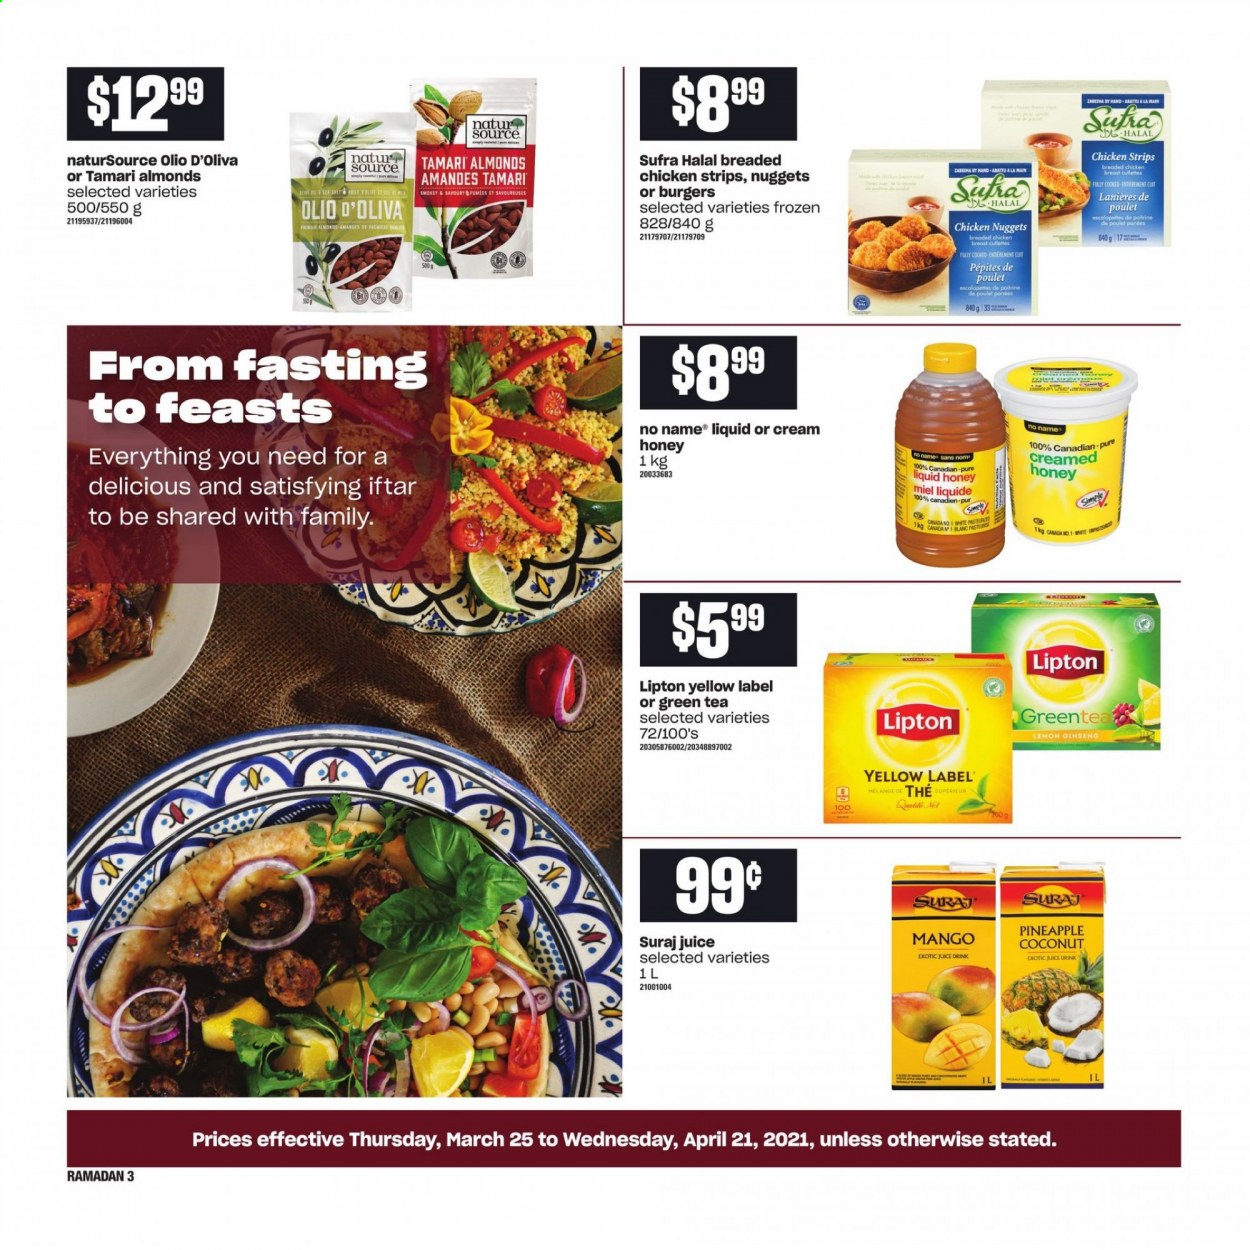 thumbnail - Loblaws Flyer - March 25, 2021 - April 21, 2021 - Sales products - mango, pineapple, coconut, No Name, nuggets, fried chicken, chicken nuggets, strips, chicken strips, honey, almonds, juice, green tea, chicken, ginseng. Page 3.